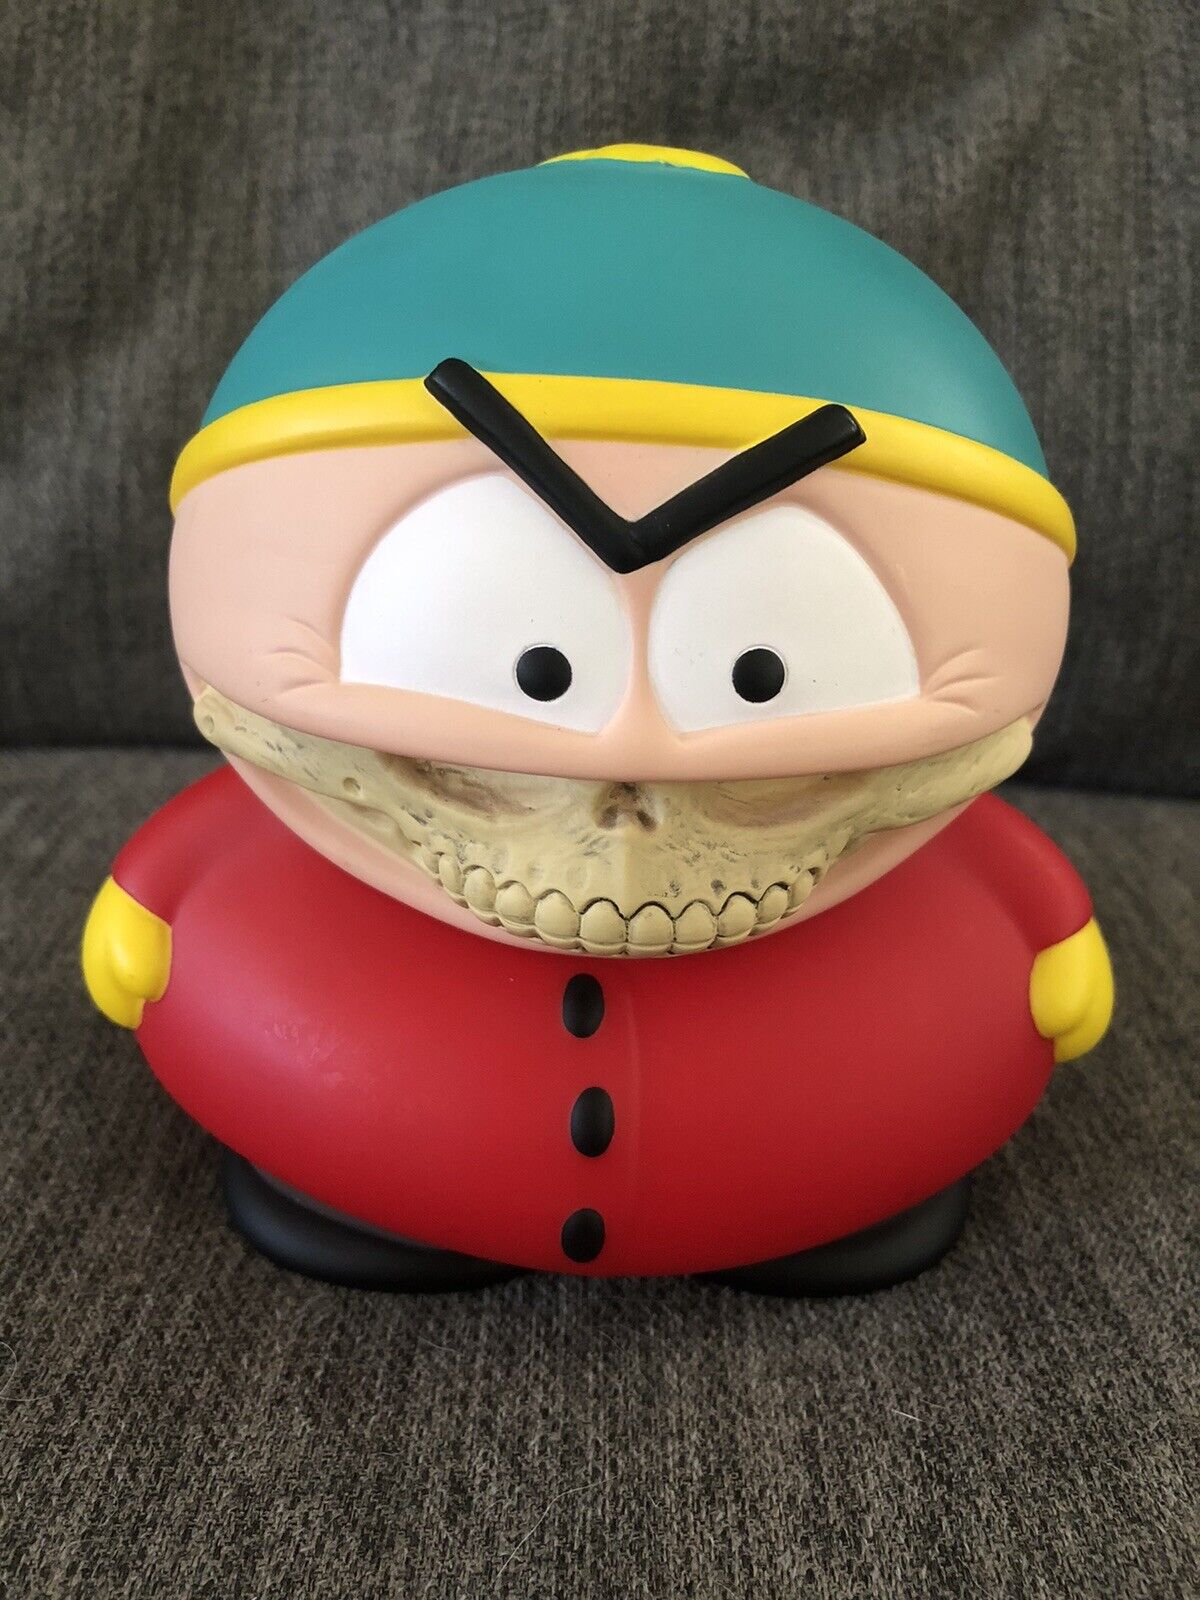 RON ENGLISH 2017 CARTMAN GRIN FIGURE VERY RARE COLLECTIBLE NUMBERED SOUTH PARK